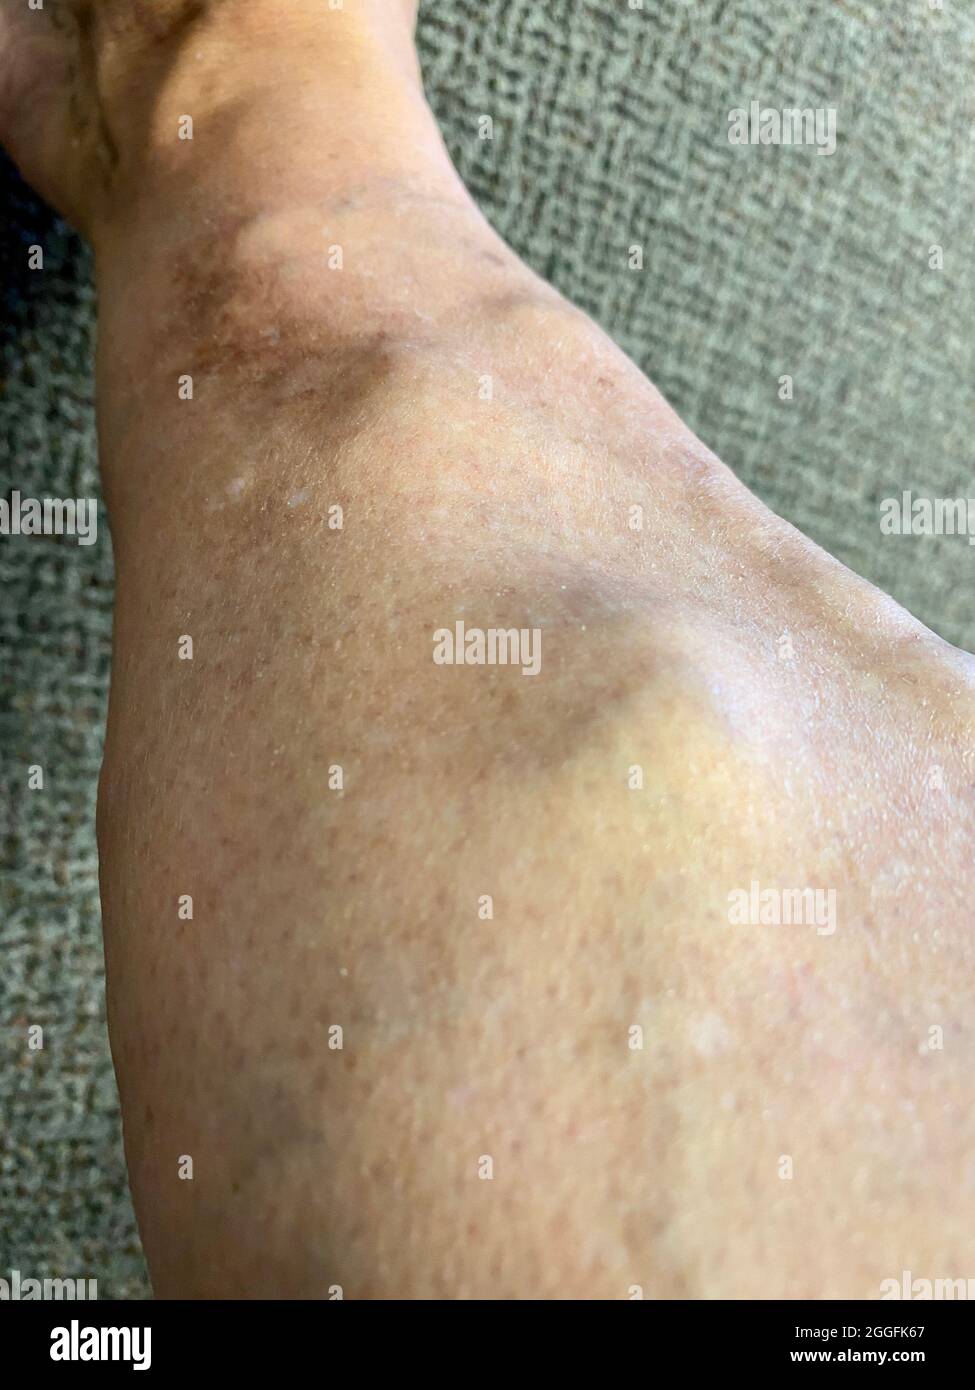 Varicose veins on the lower leg of a female in her late 40's. Stock Photo